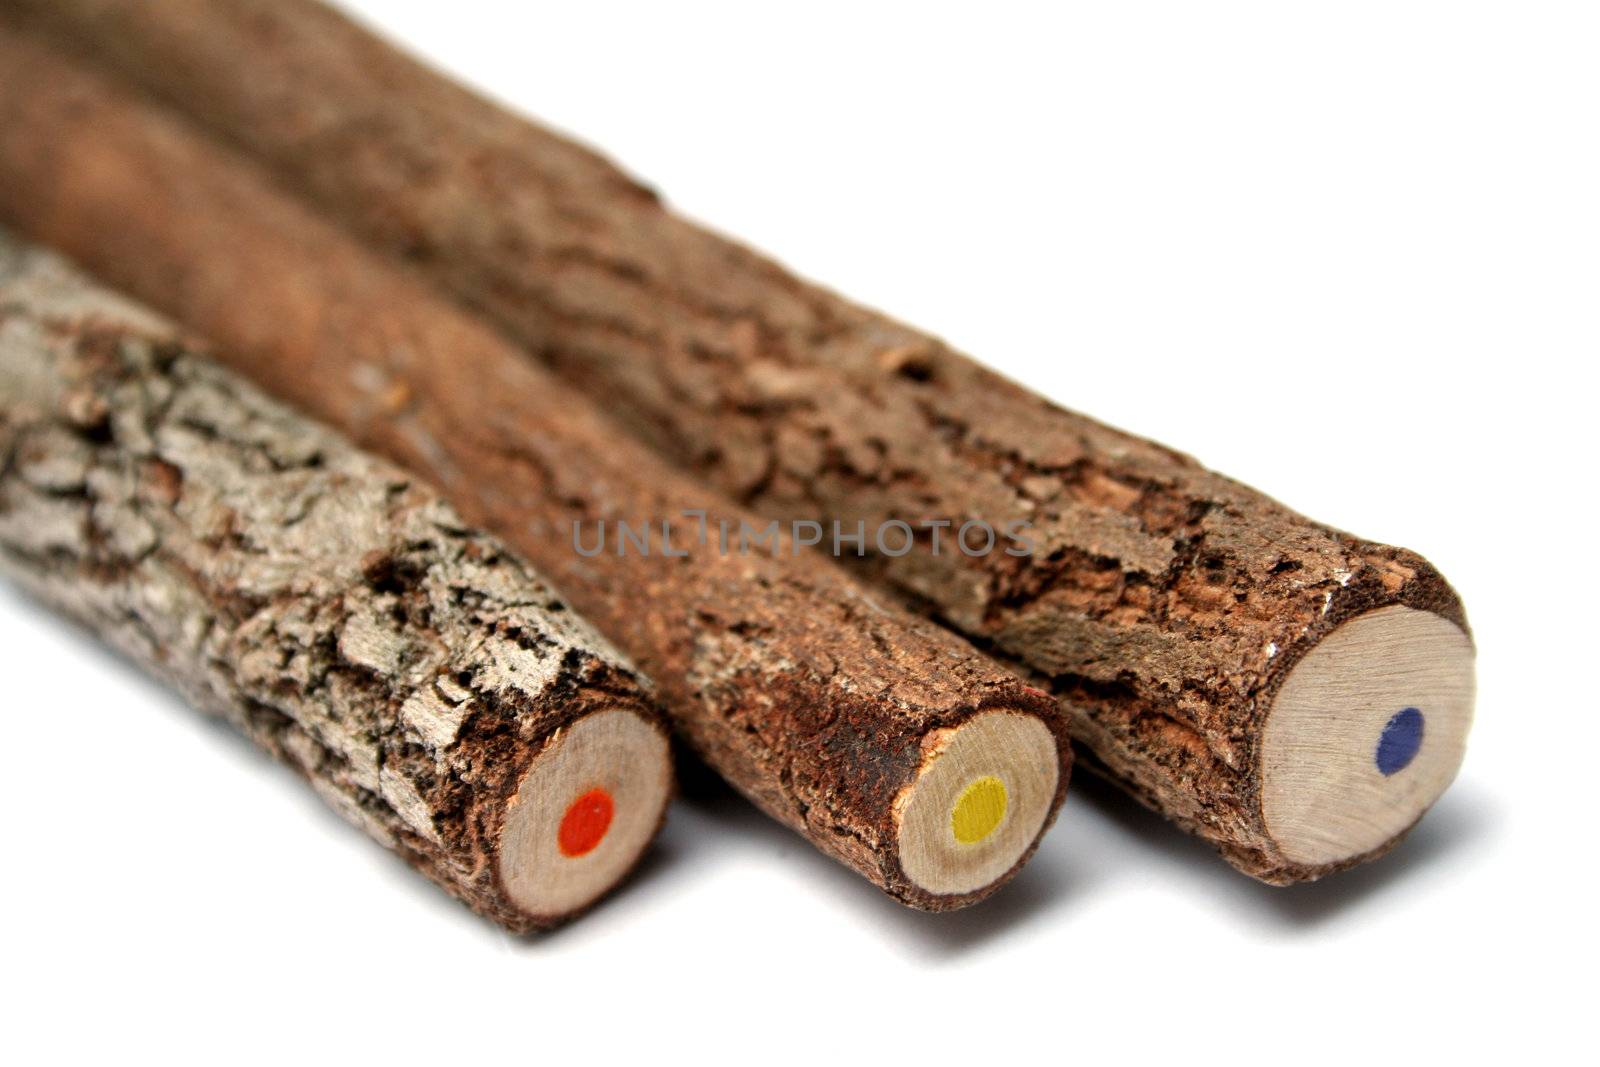 Three unusual pencils made of branches of a tree with a multi-coloured core on a diagonal